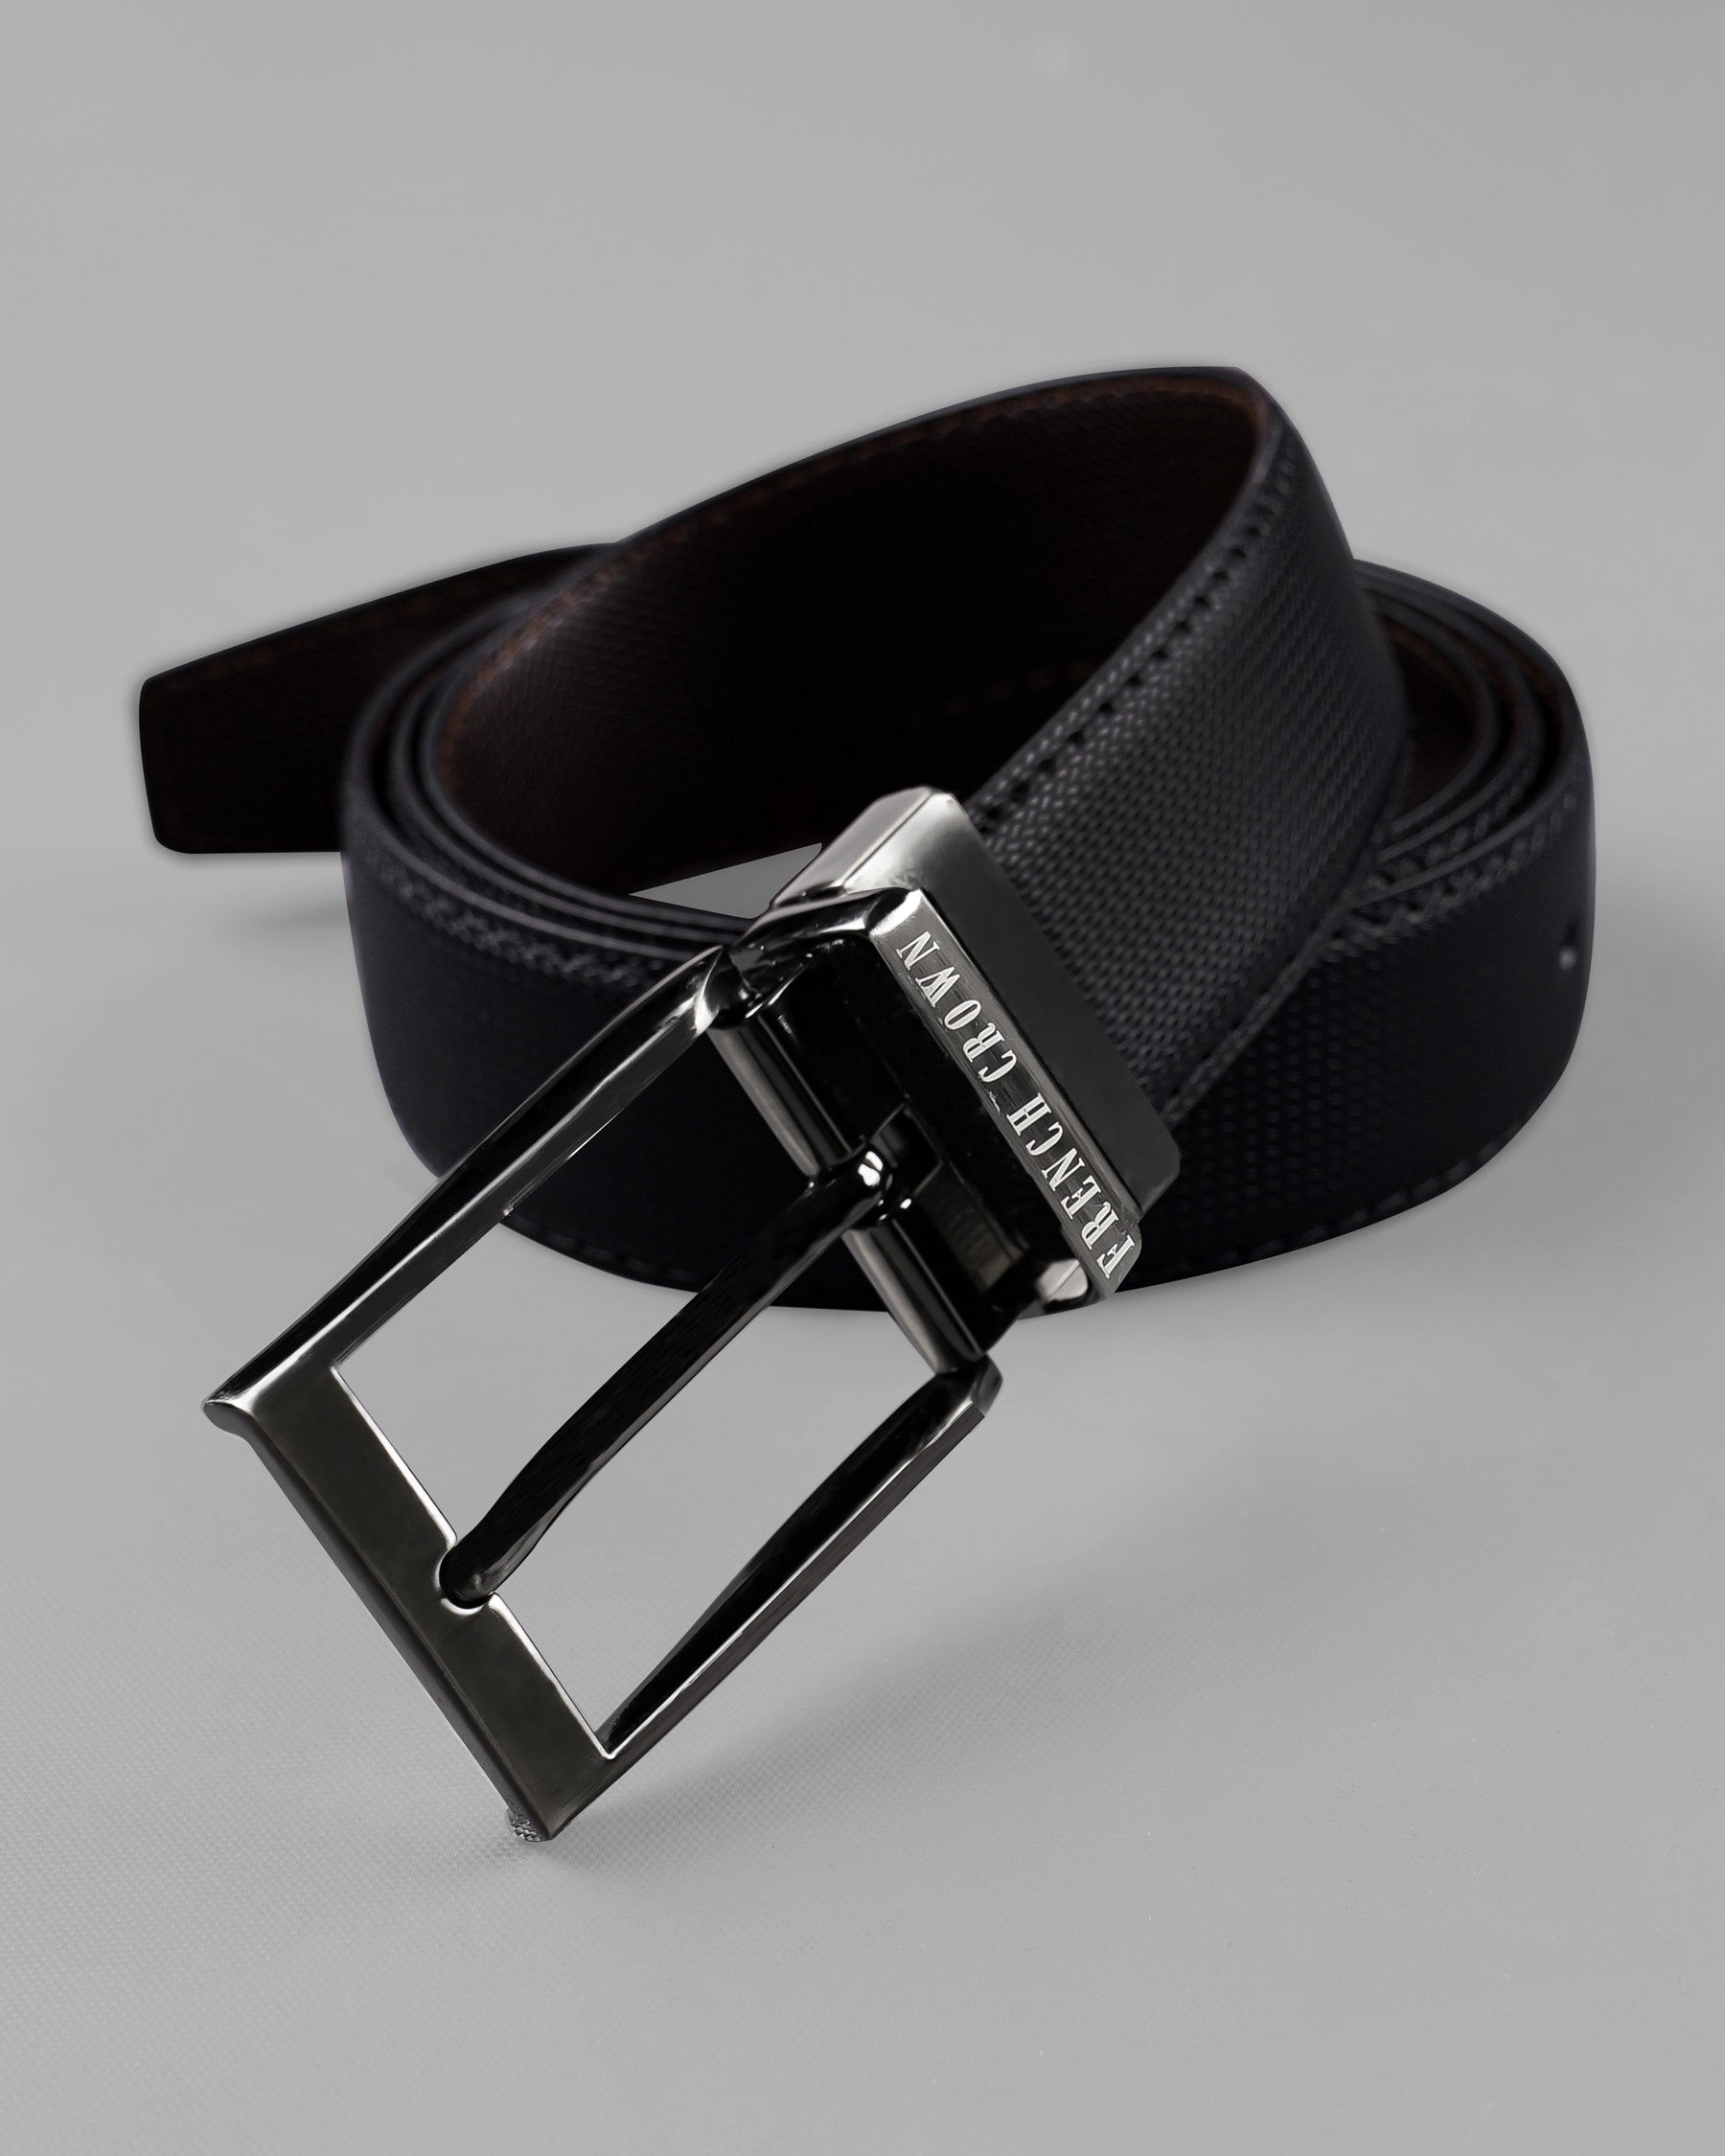 Silver Metallic Shiny Buckle with Jade Black and Brown Leather Free Handcrafted Reversible Belt BT077-28, BT077-30, BT077-32, BT077-34, BT077-36, BT077-38